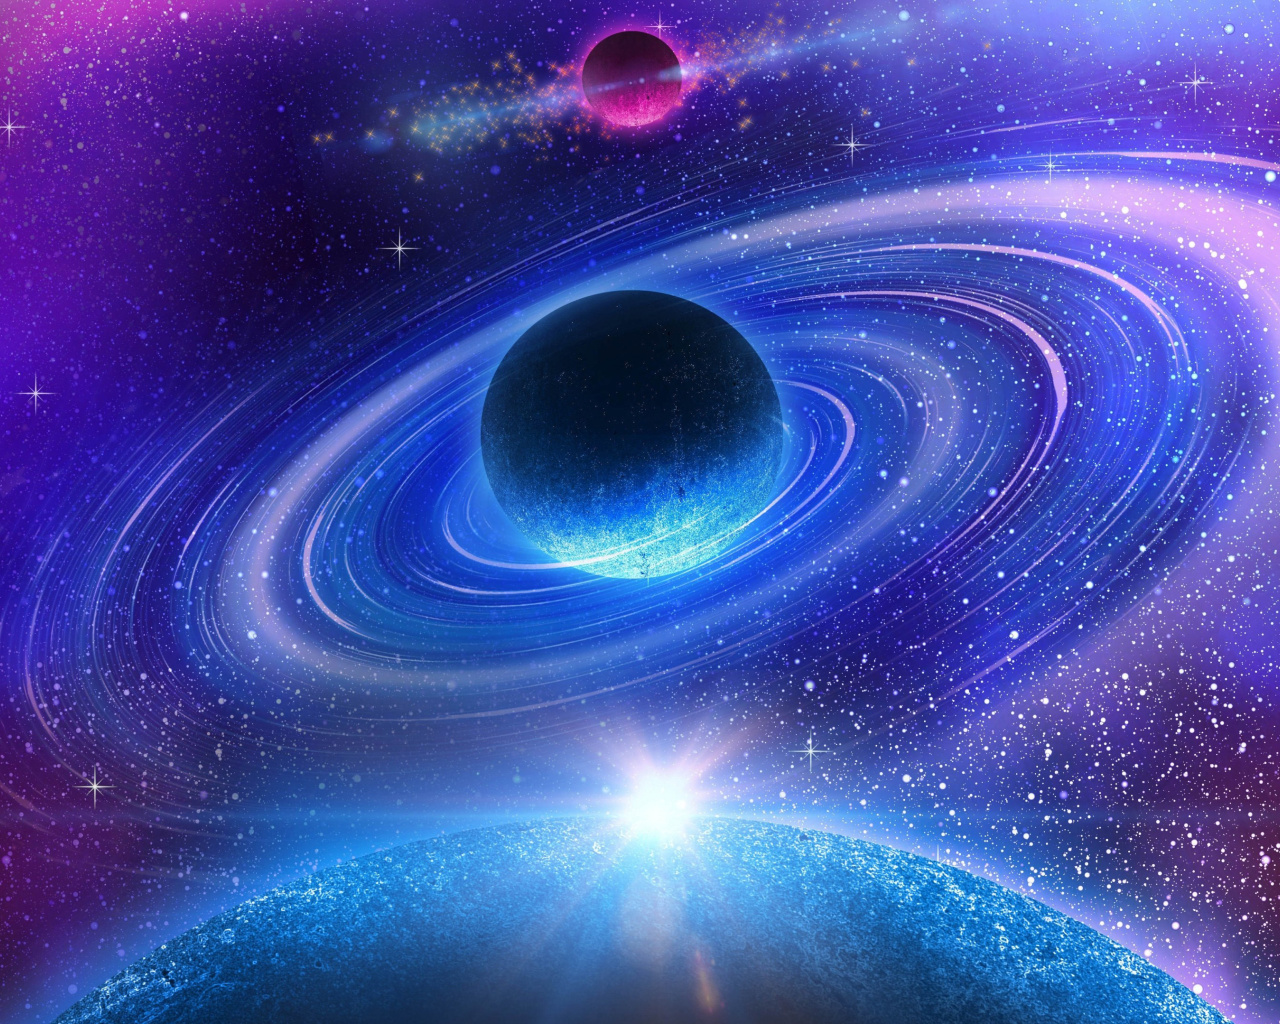 Planet with rings wallpaper 1280x1024